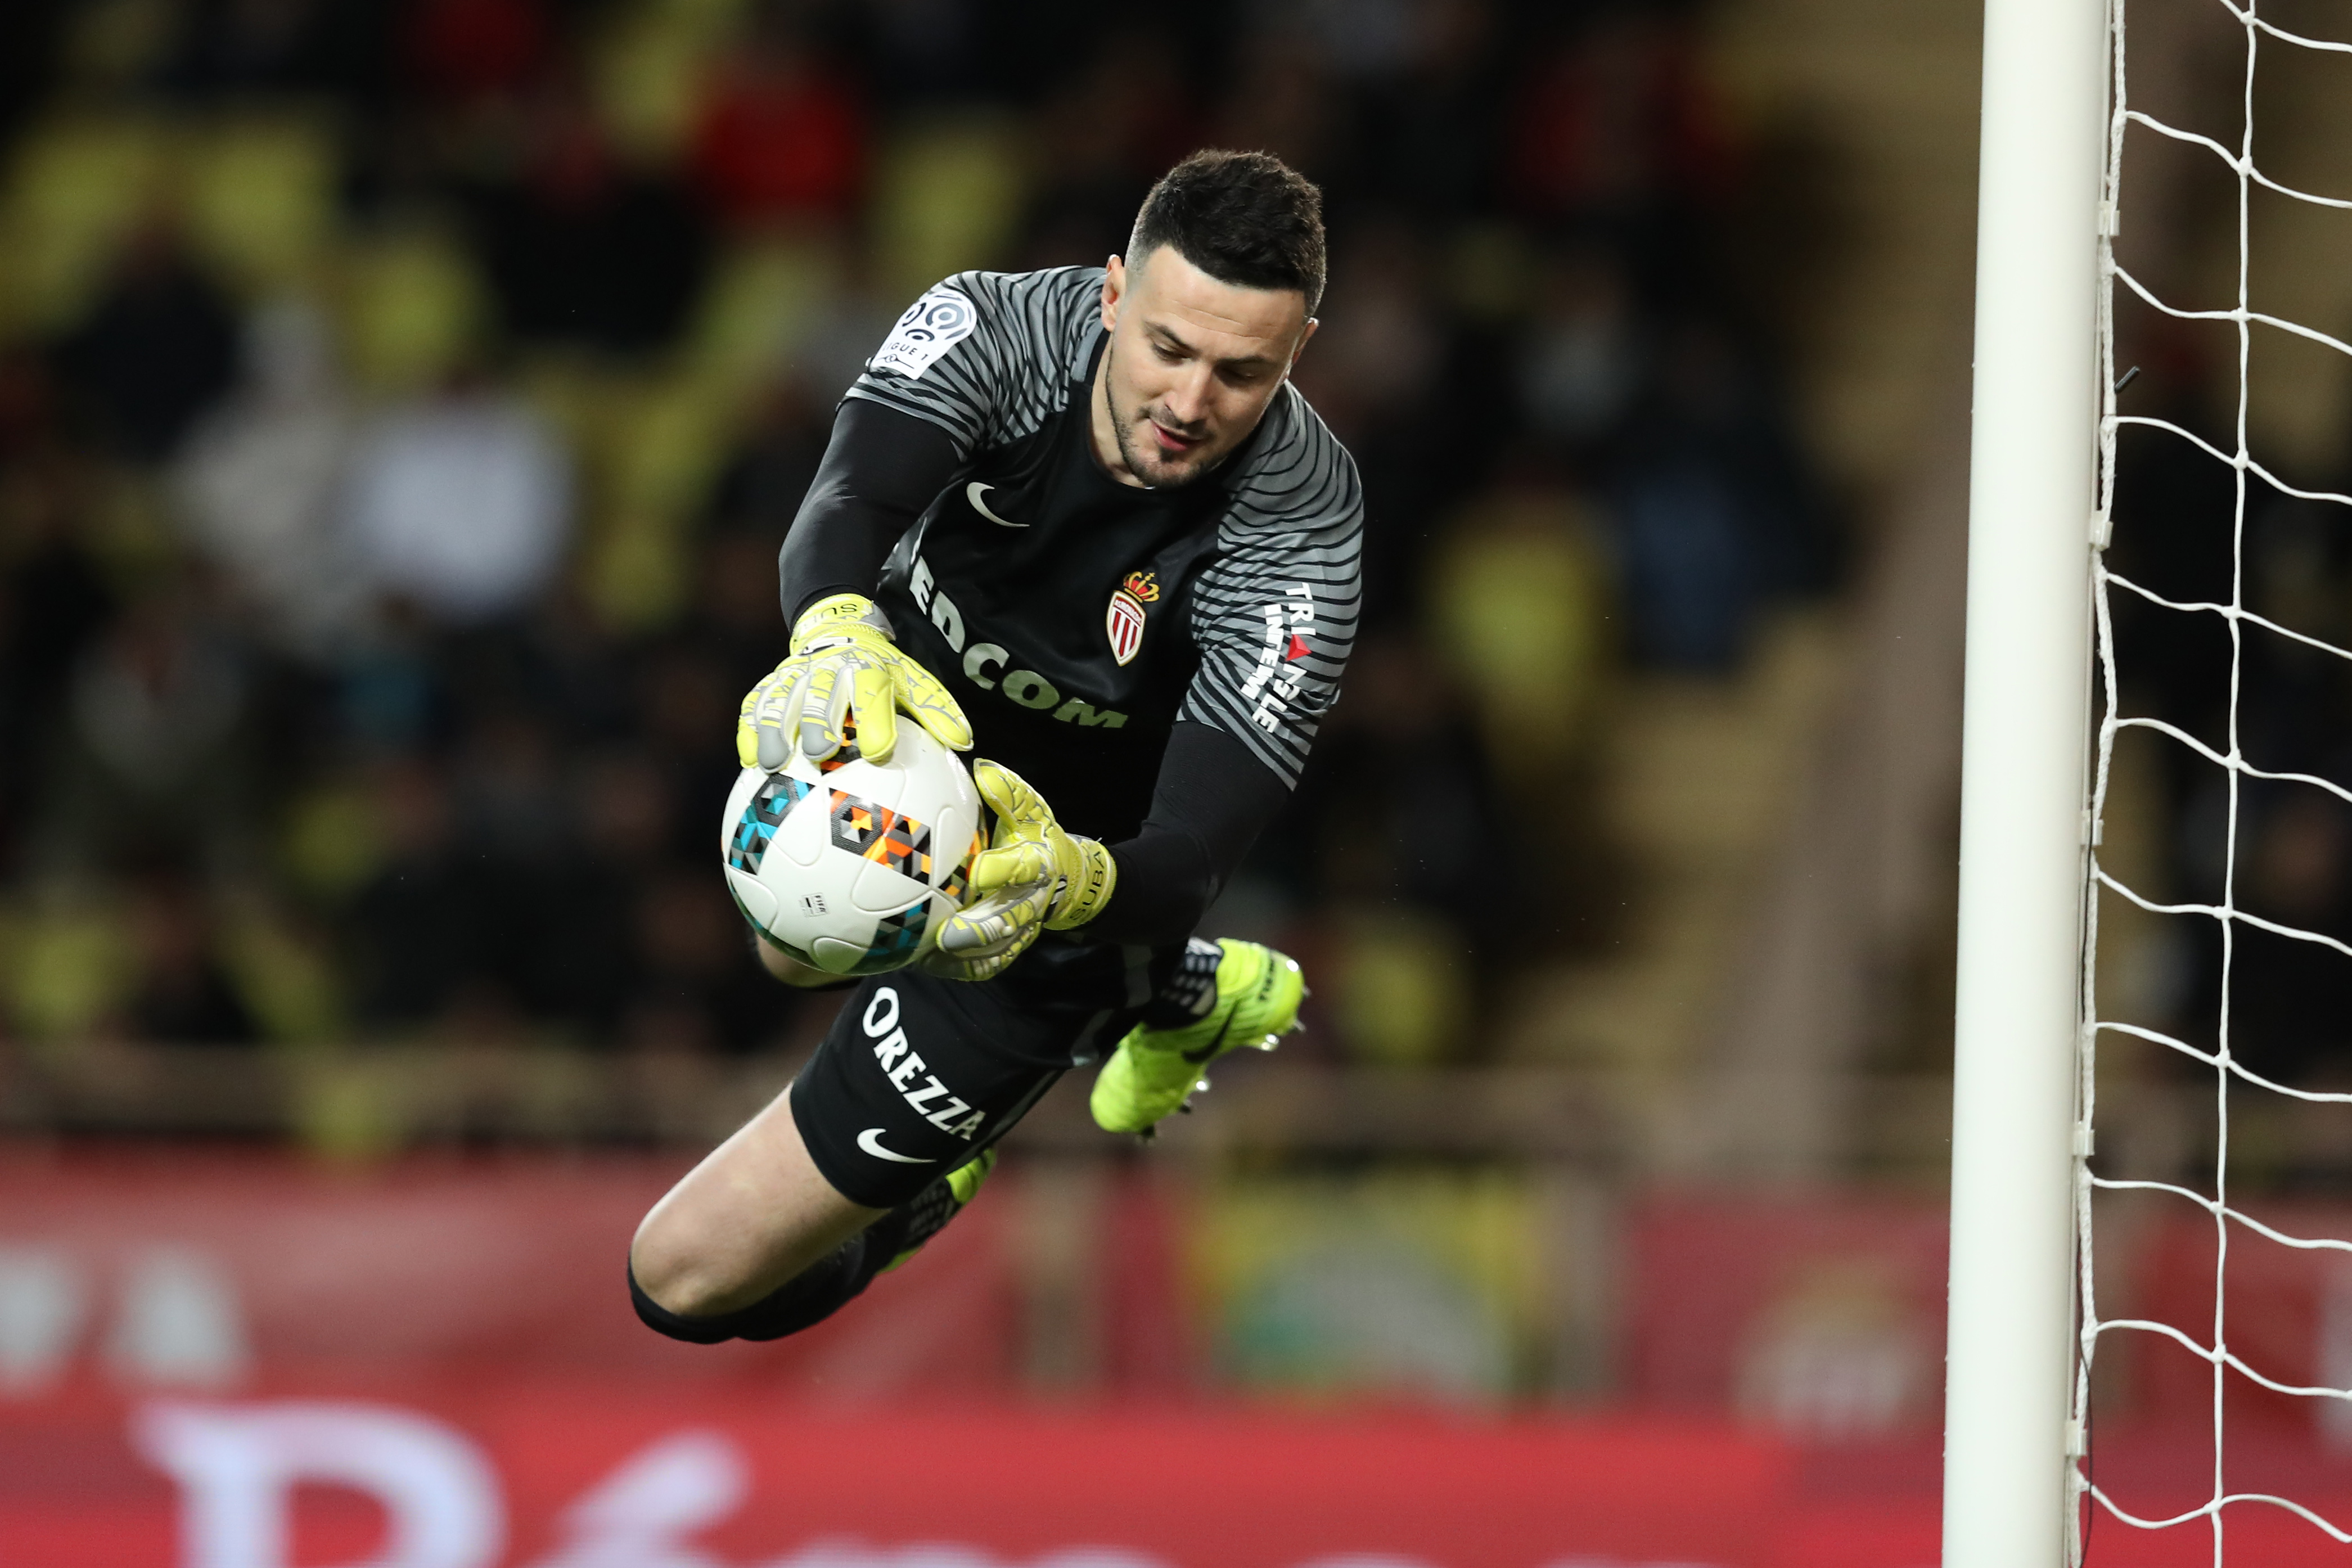 Monaco's Croatian goalkeeper Danijel Subasic makes a save during the French L1 football match Monaco (ASM) vs Nantes (FCN) on March 5, 2017 at the "Louis II Stadium" in Monaco.   / AFP PHOTO / VALERY HACHE        (Photo credit should read VALERY HACHE/AFP/Getty Images)